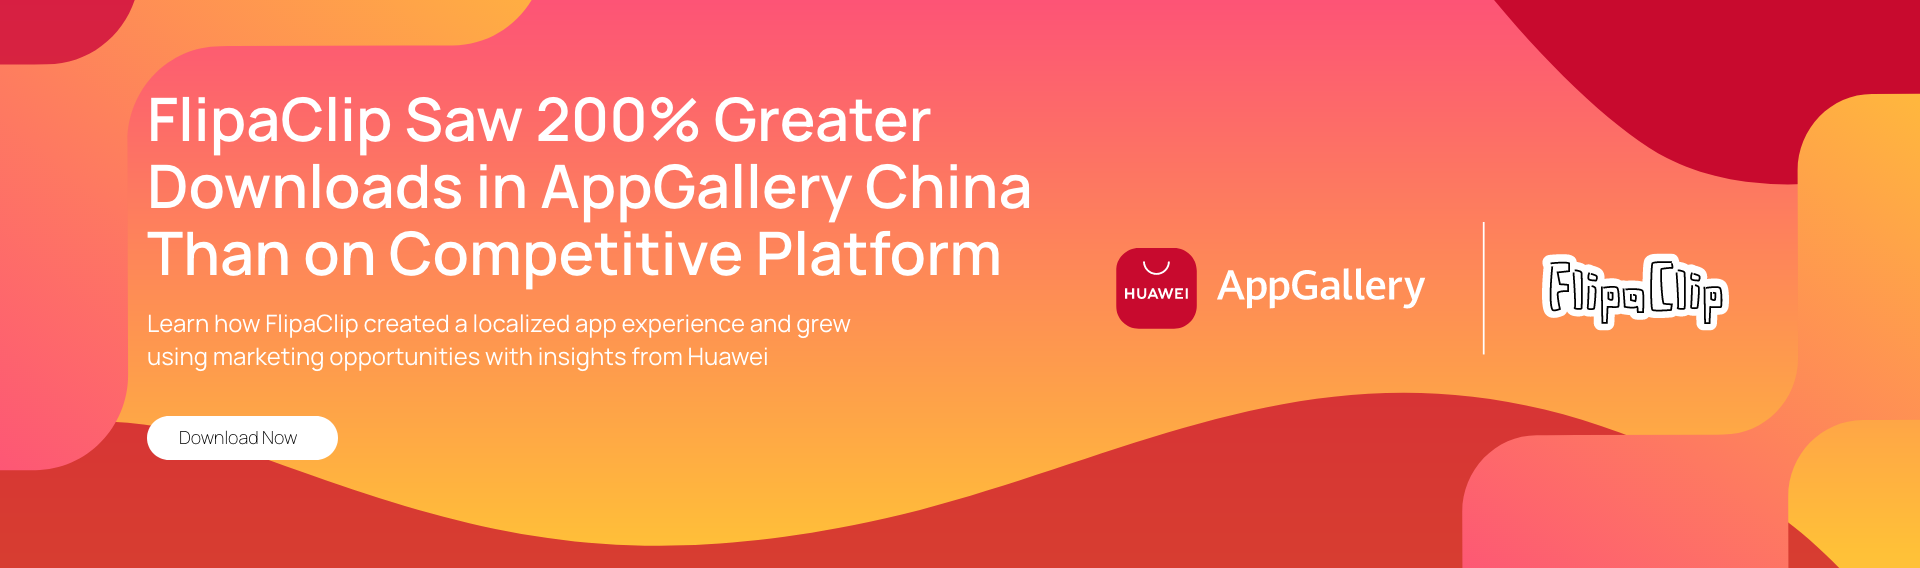 FlipaClip Saw 200% Greater Downloads on AppGallery in China vs. Competition